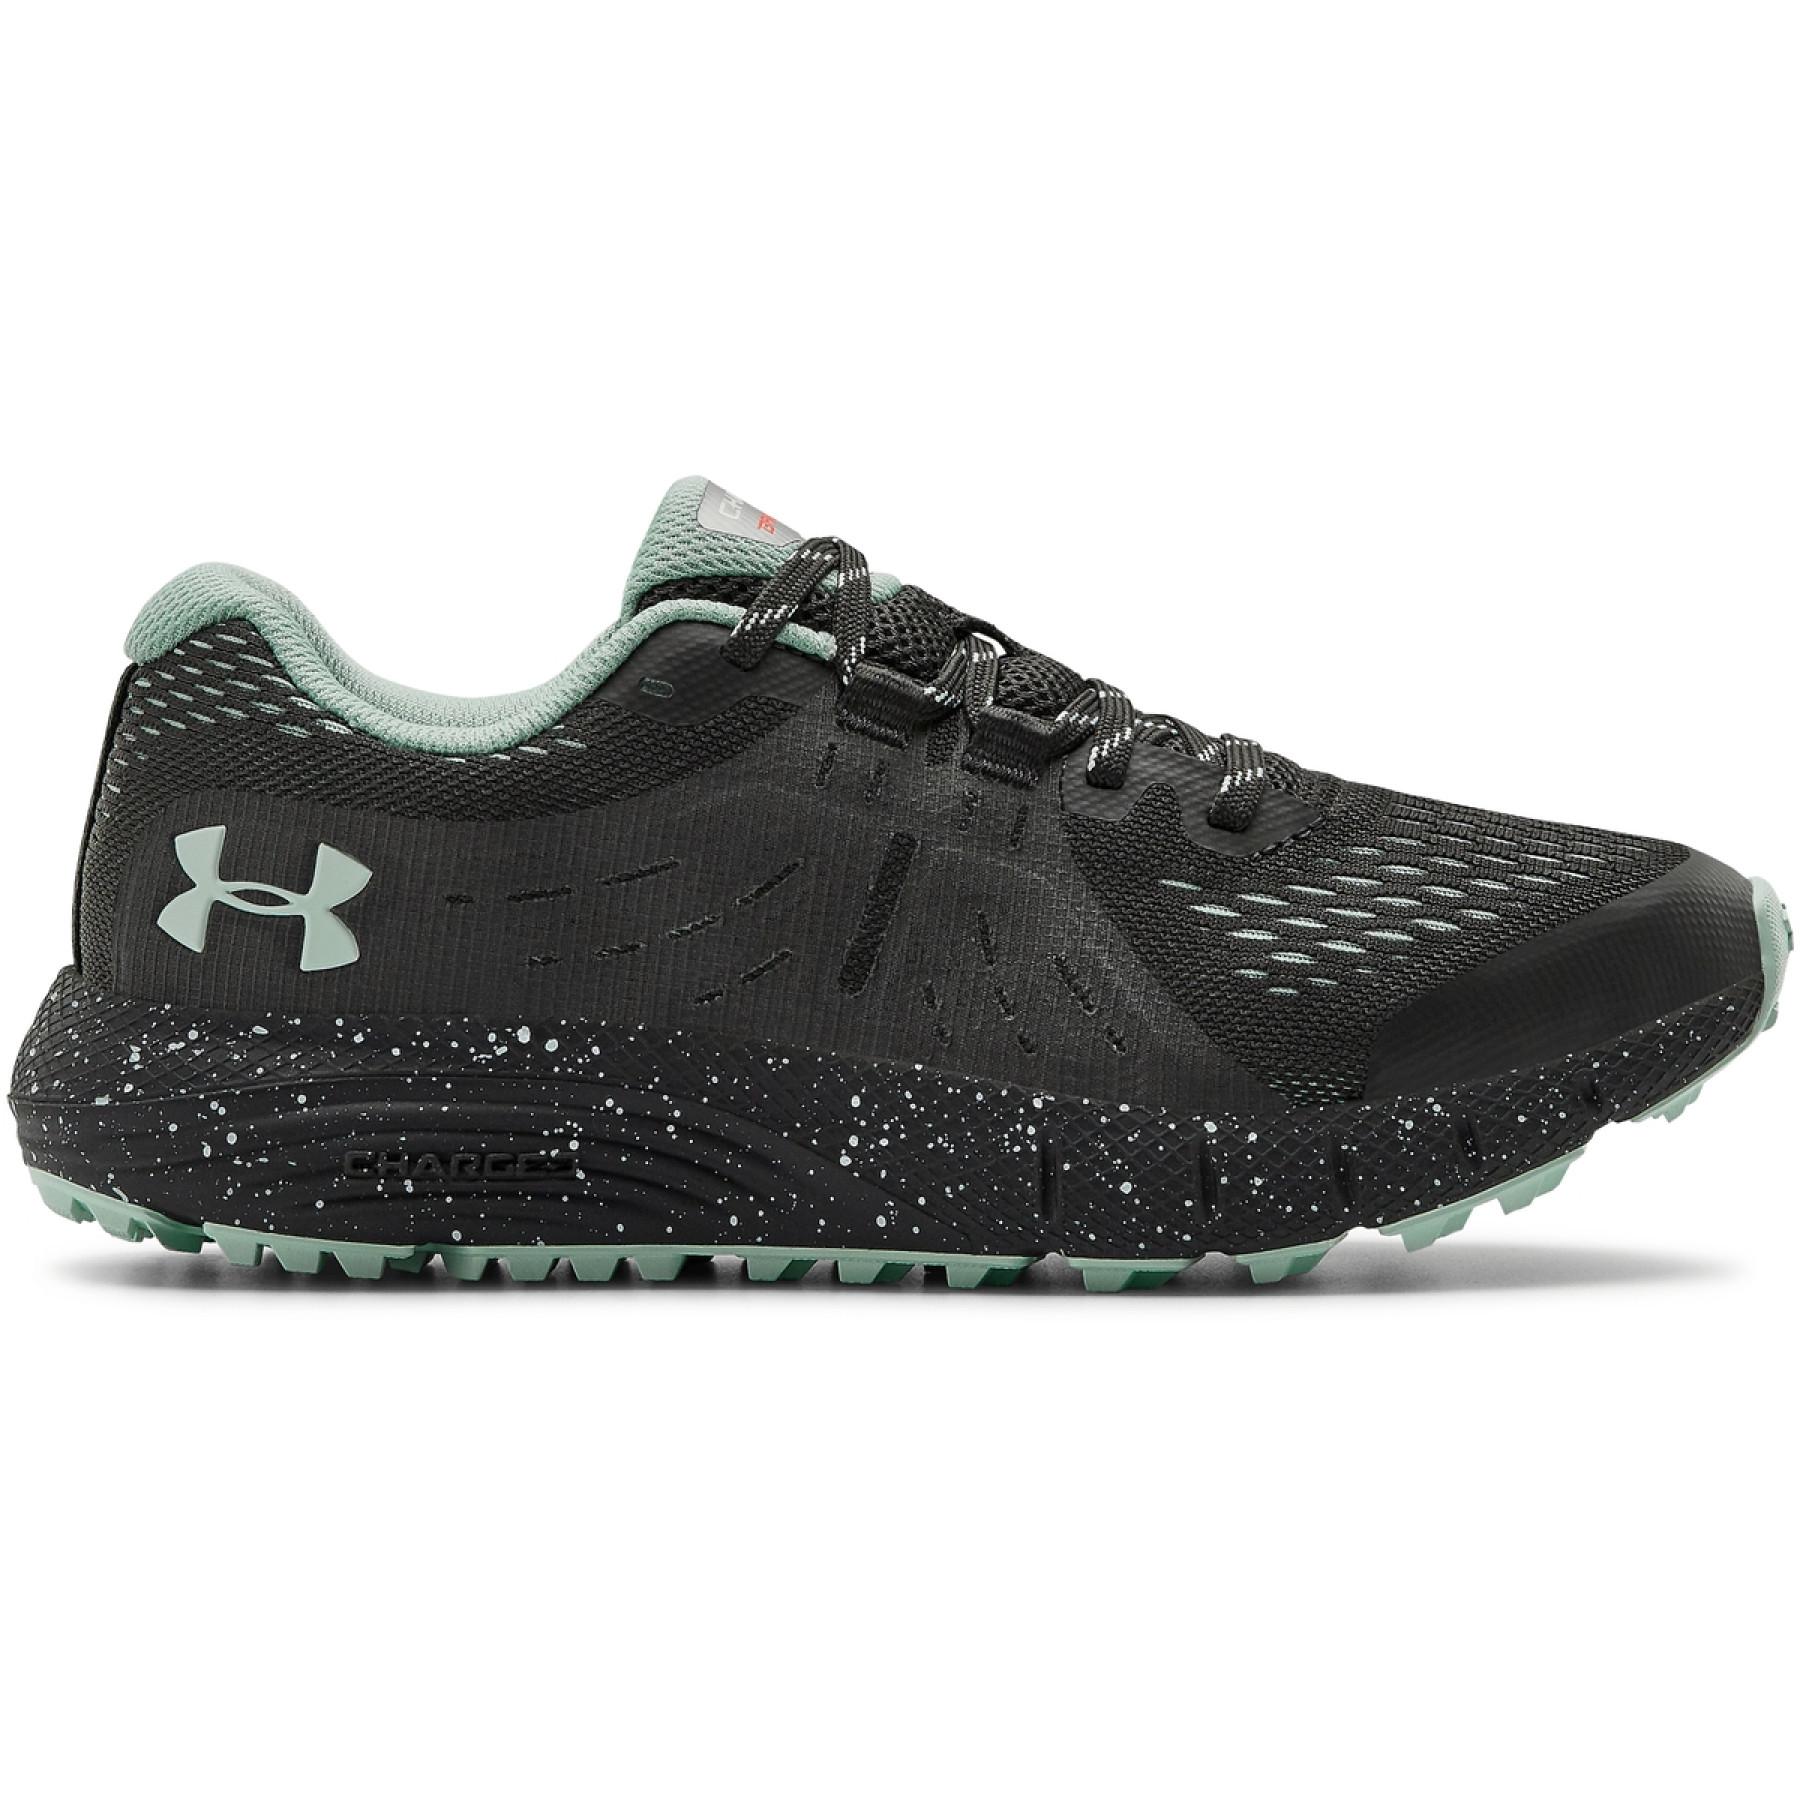 Chaussures de running femme Under Armour Charged Bandit Trail